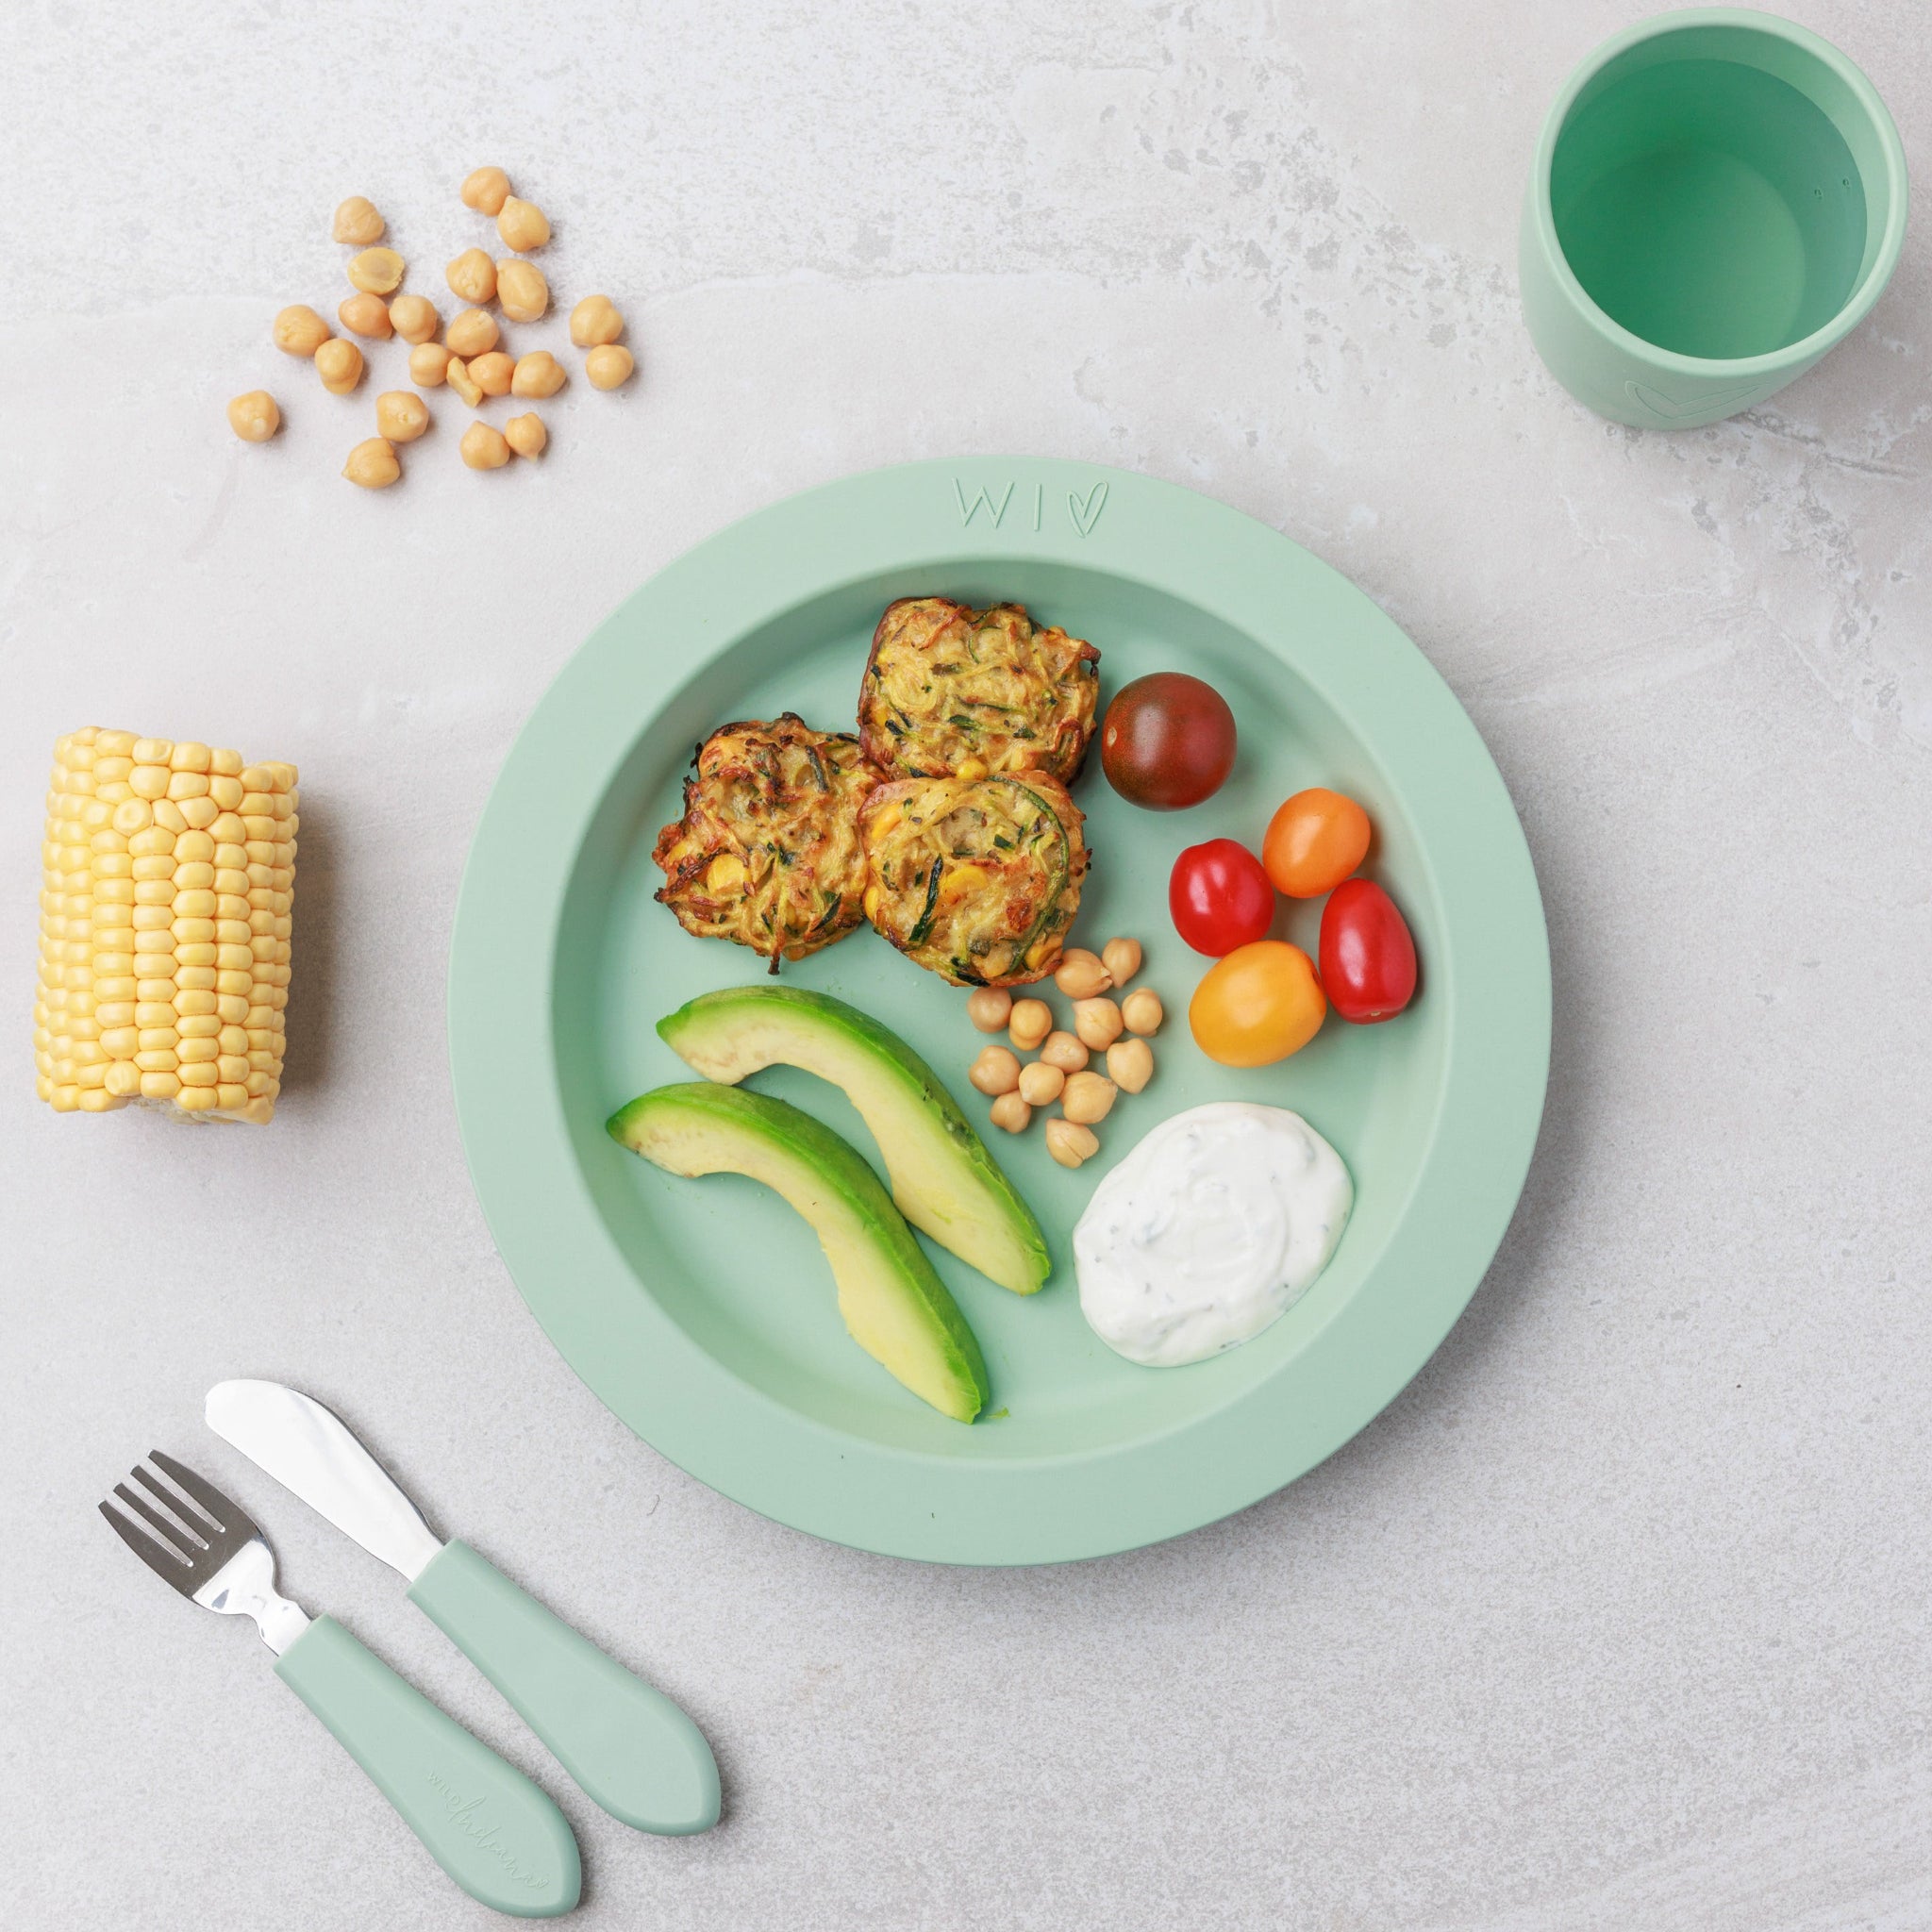 A plate of Zucchini & Corn Fritters served with veggies from Audrey and Alfie's Finger Food Range